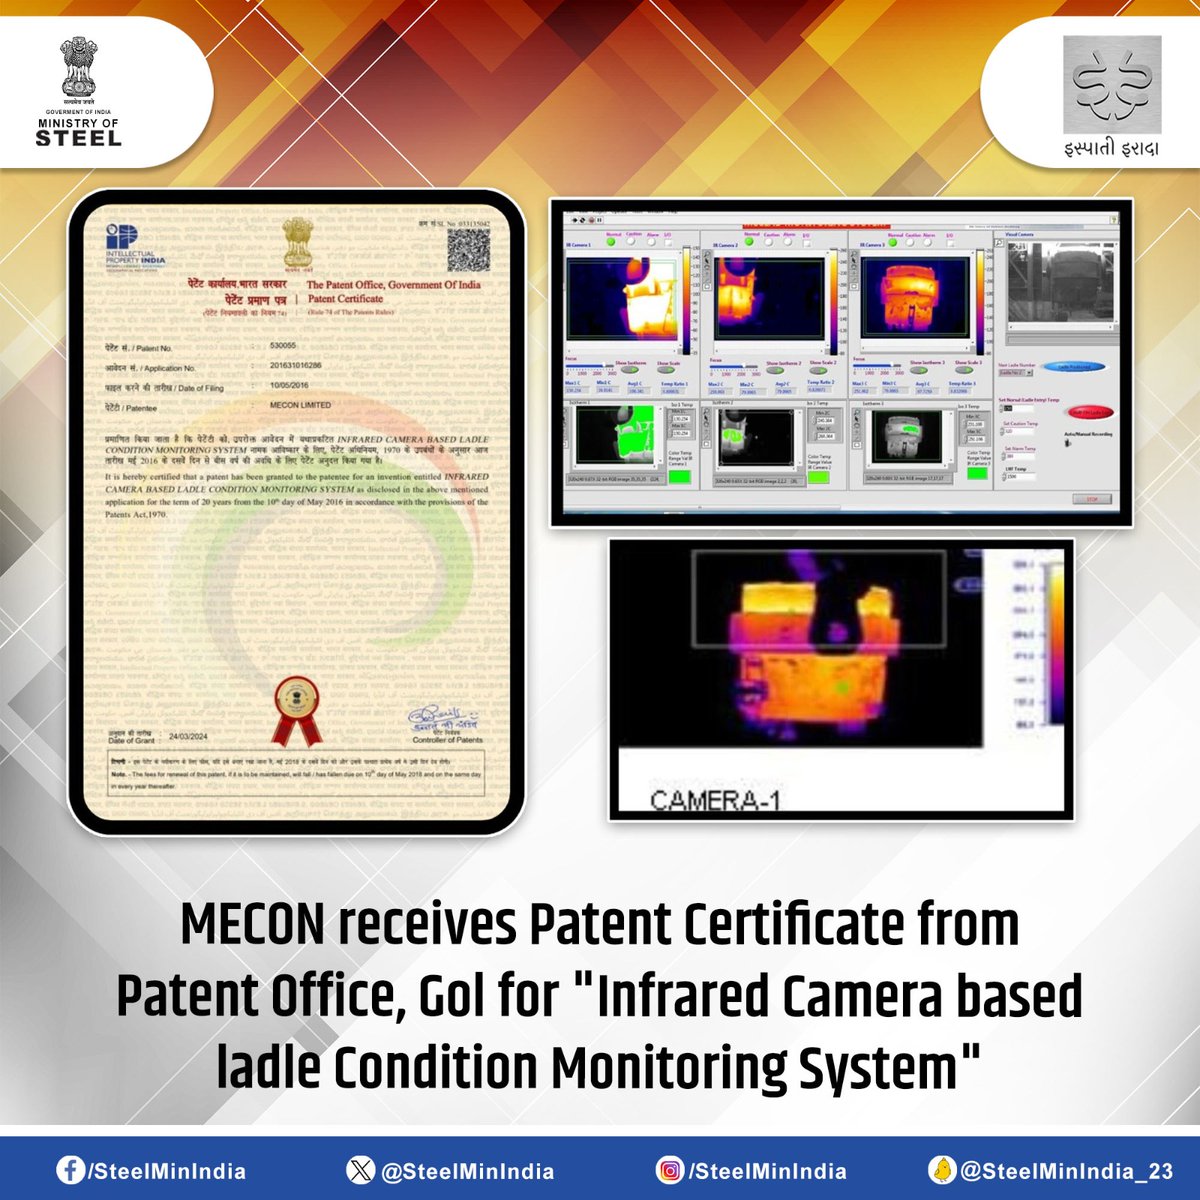 #MECON earns a patent from the Government of India for an 'Infrared Camera Based Ladle Condition Monitoring System'. This system, which utilizes cameras & vision algorithms is commissioned for ladles in the SMS-II Shop- #RSP Rourkela, #SAIL. #Innovation #Patent